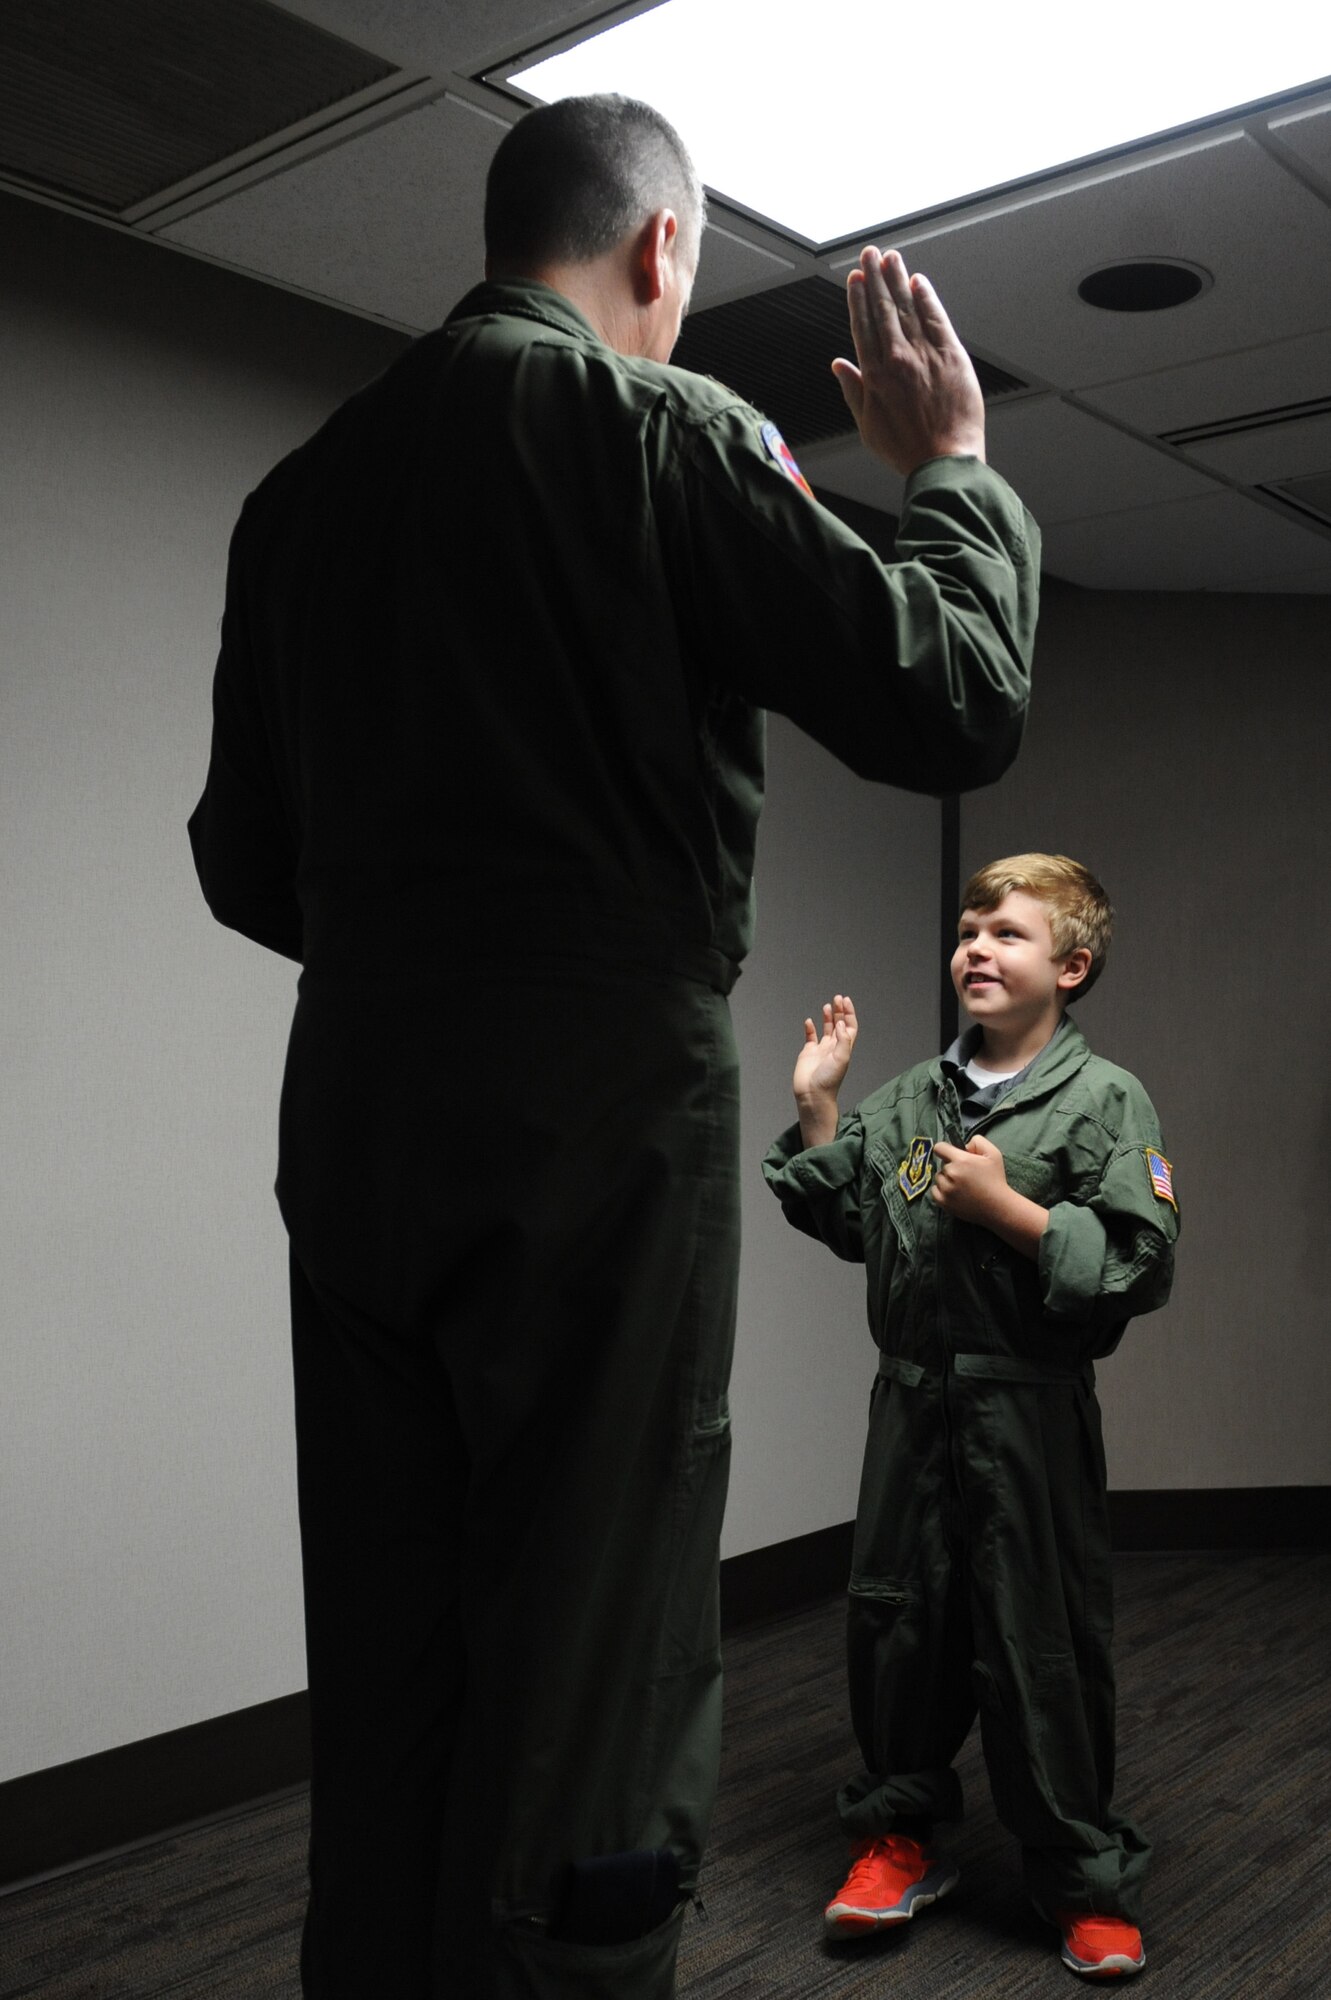 Jon Bryant “JB” Orso of Mobile, Ala., is sworn in as an honorary Air Force Reserve second lieutenant by Maj. Jerry Rutland, 403rd Wing chief pilot, at the 53rd Weather Reconnaissance Squadron building during the 403rd Wing’s first Pilot for a Day event April 26, 2016, Keesler Air Force Base, Miss. Orso is in remission after receiving treatment for Acute Lymphoblastic Leukemia. Pilot for a Day is a community outreach program for children who live with a chronic or life-threatening disease or illness. (U.S. Air Force photo by Kemberly Groue)